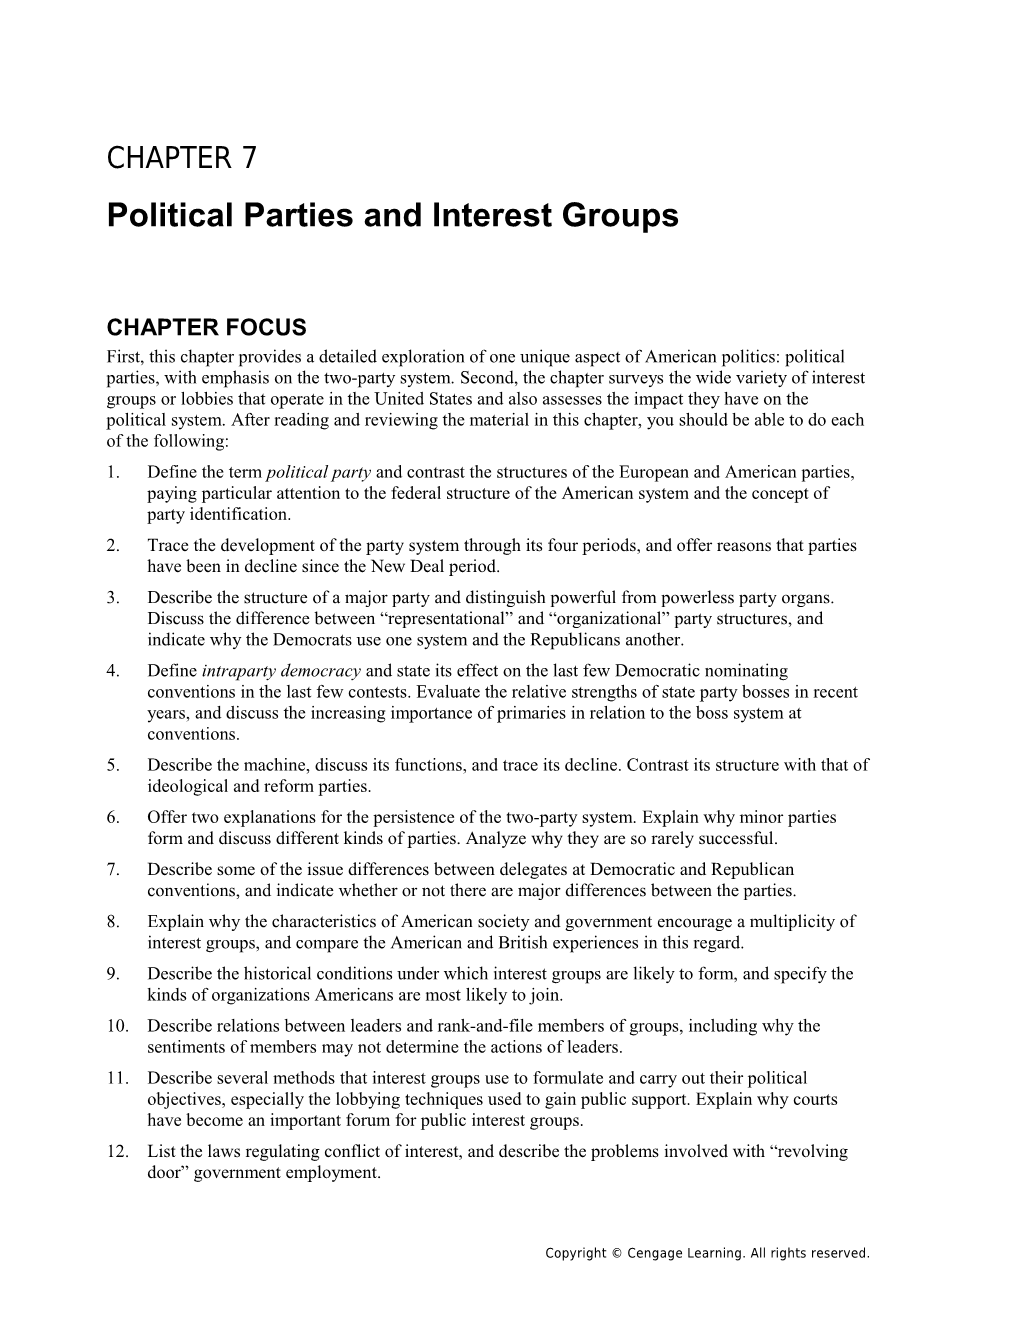 Chapter 7: Political Parties and Interest Groups 1